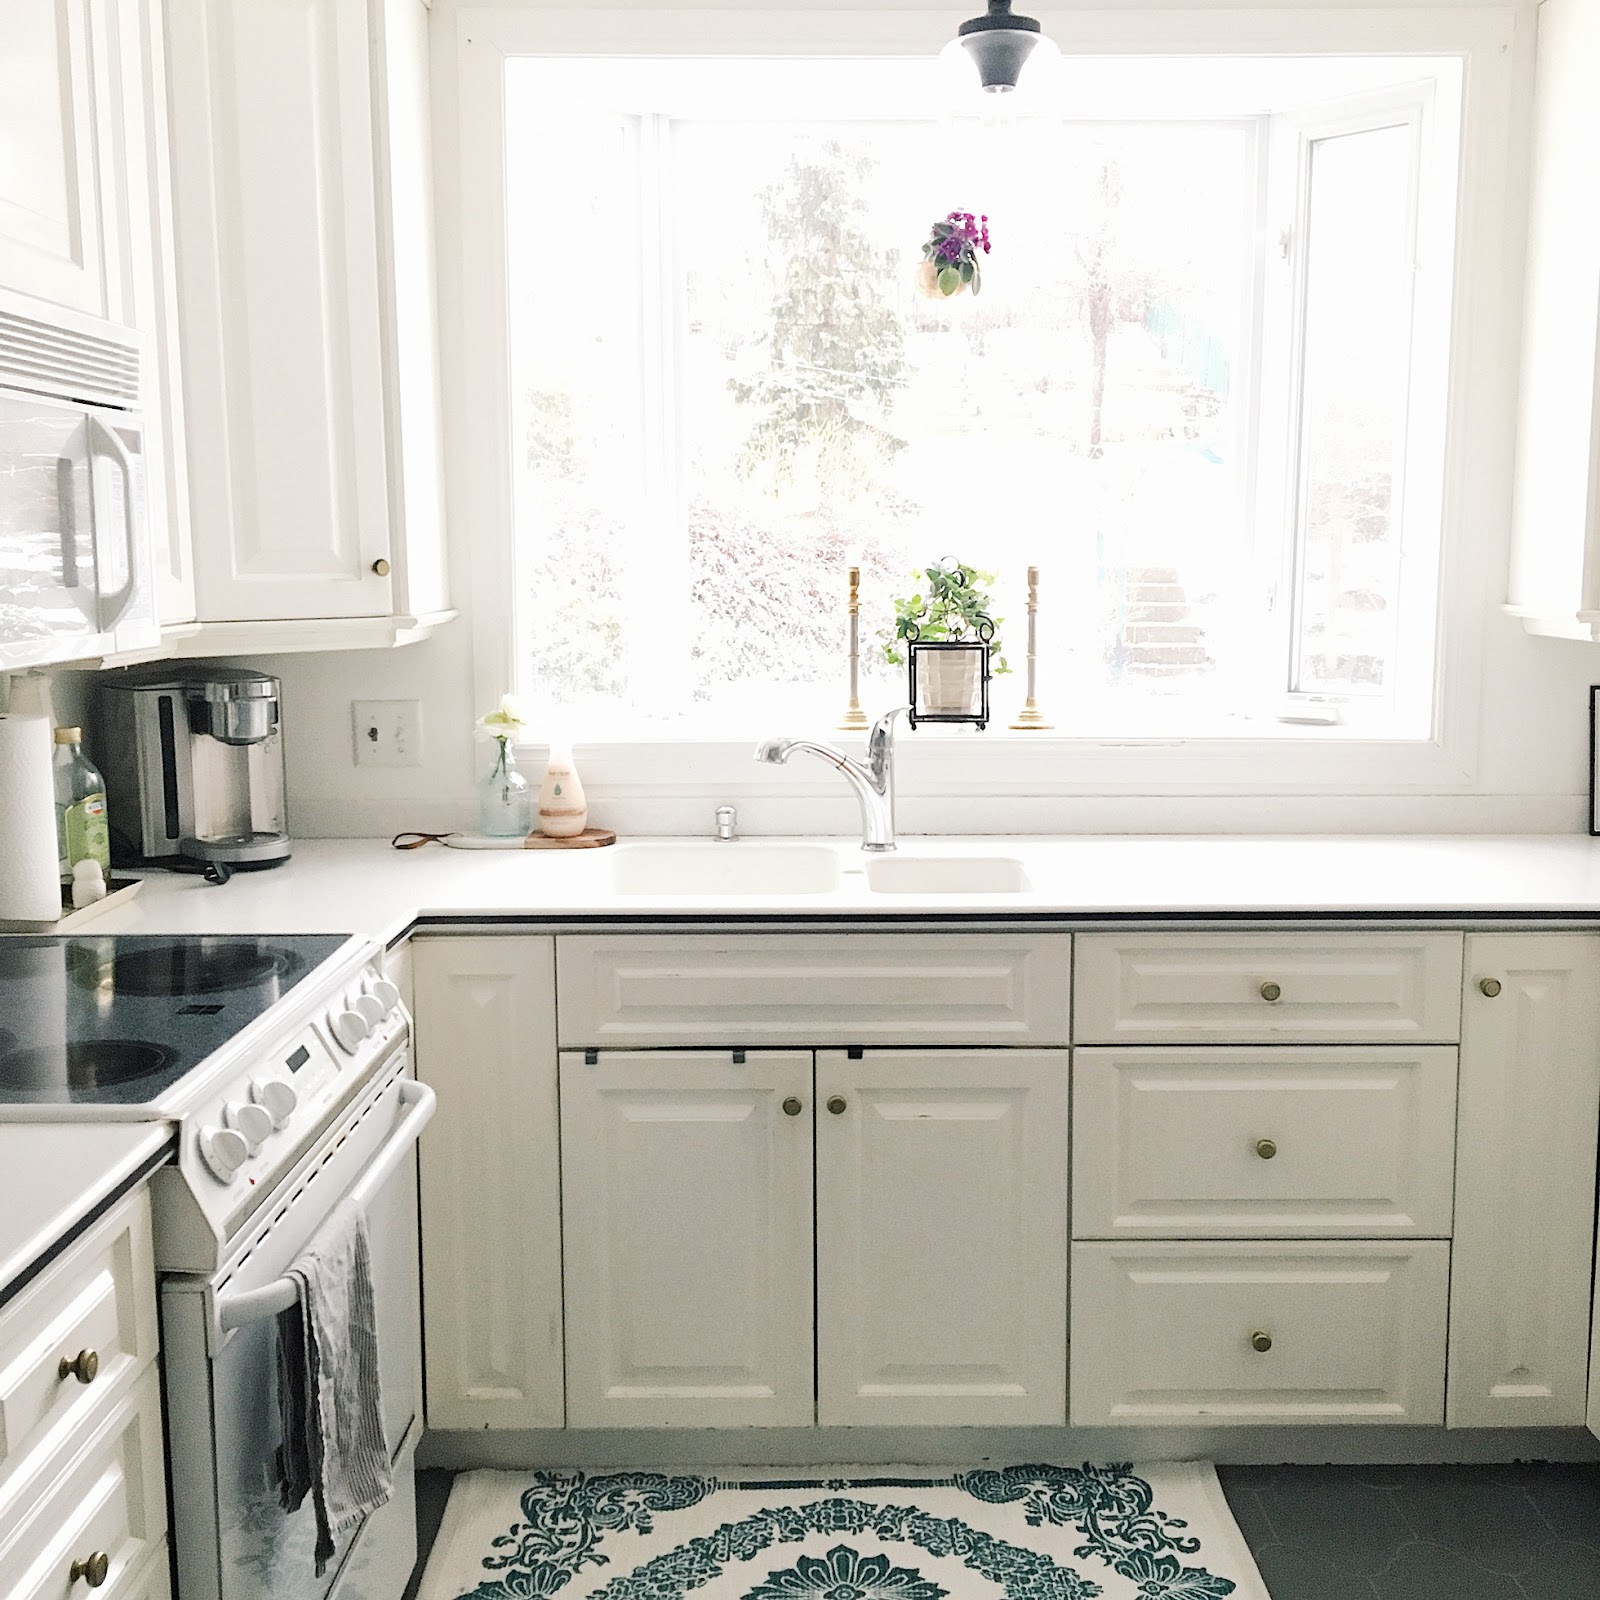 Bright white kitchen with a window over the sink